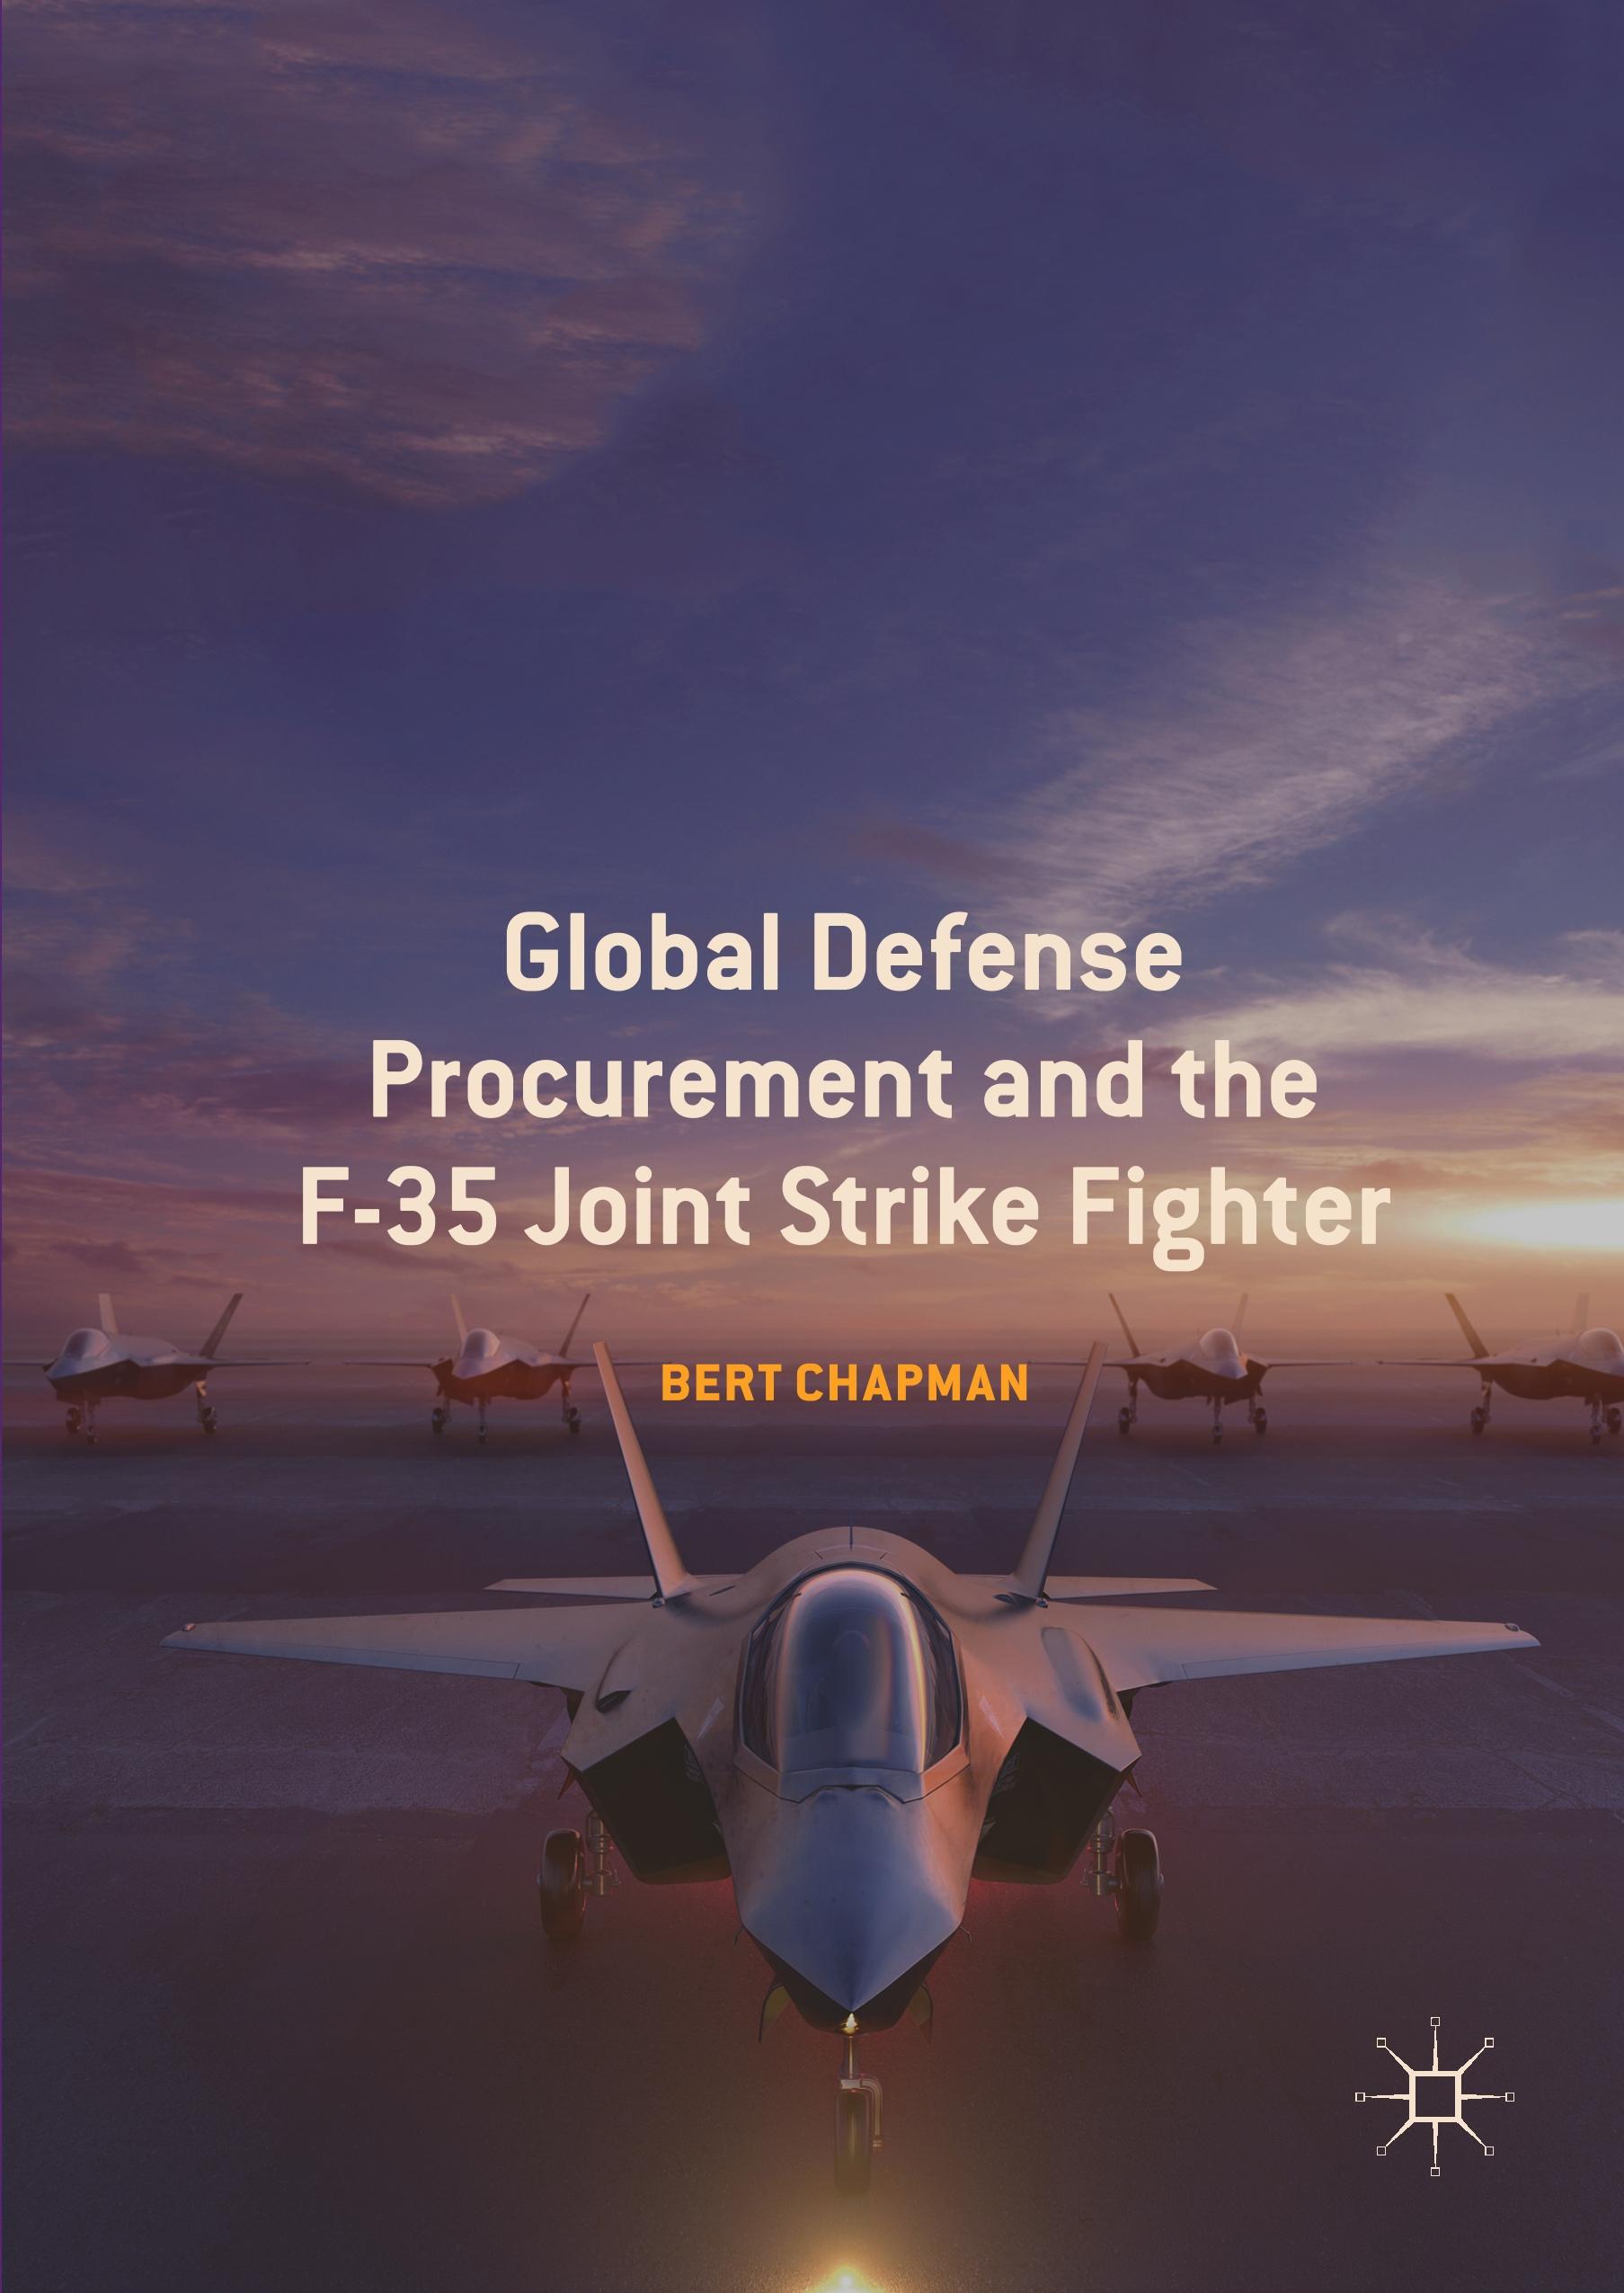 Global Defense Procurement and the F-35 Joint Strike Fighter - Bert Chapman